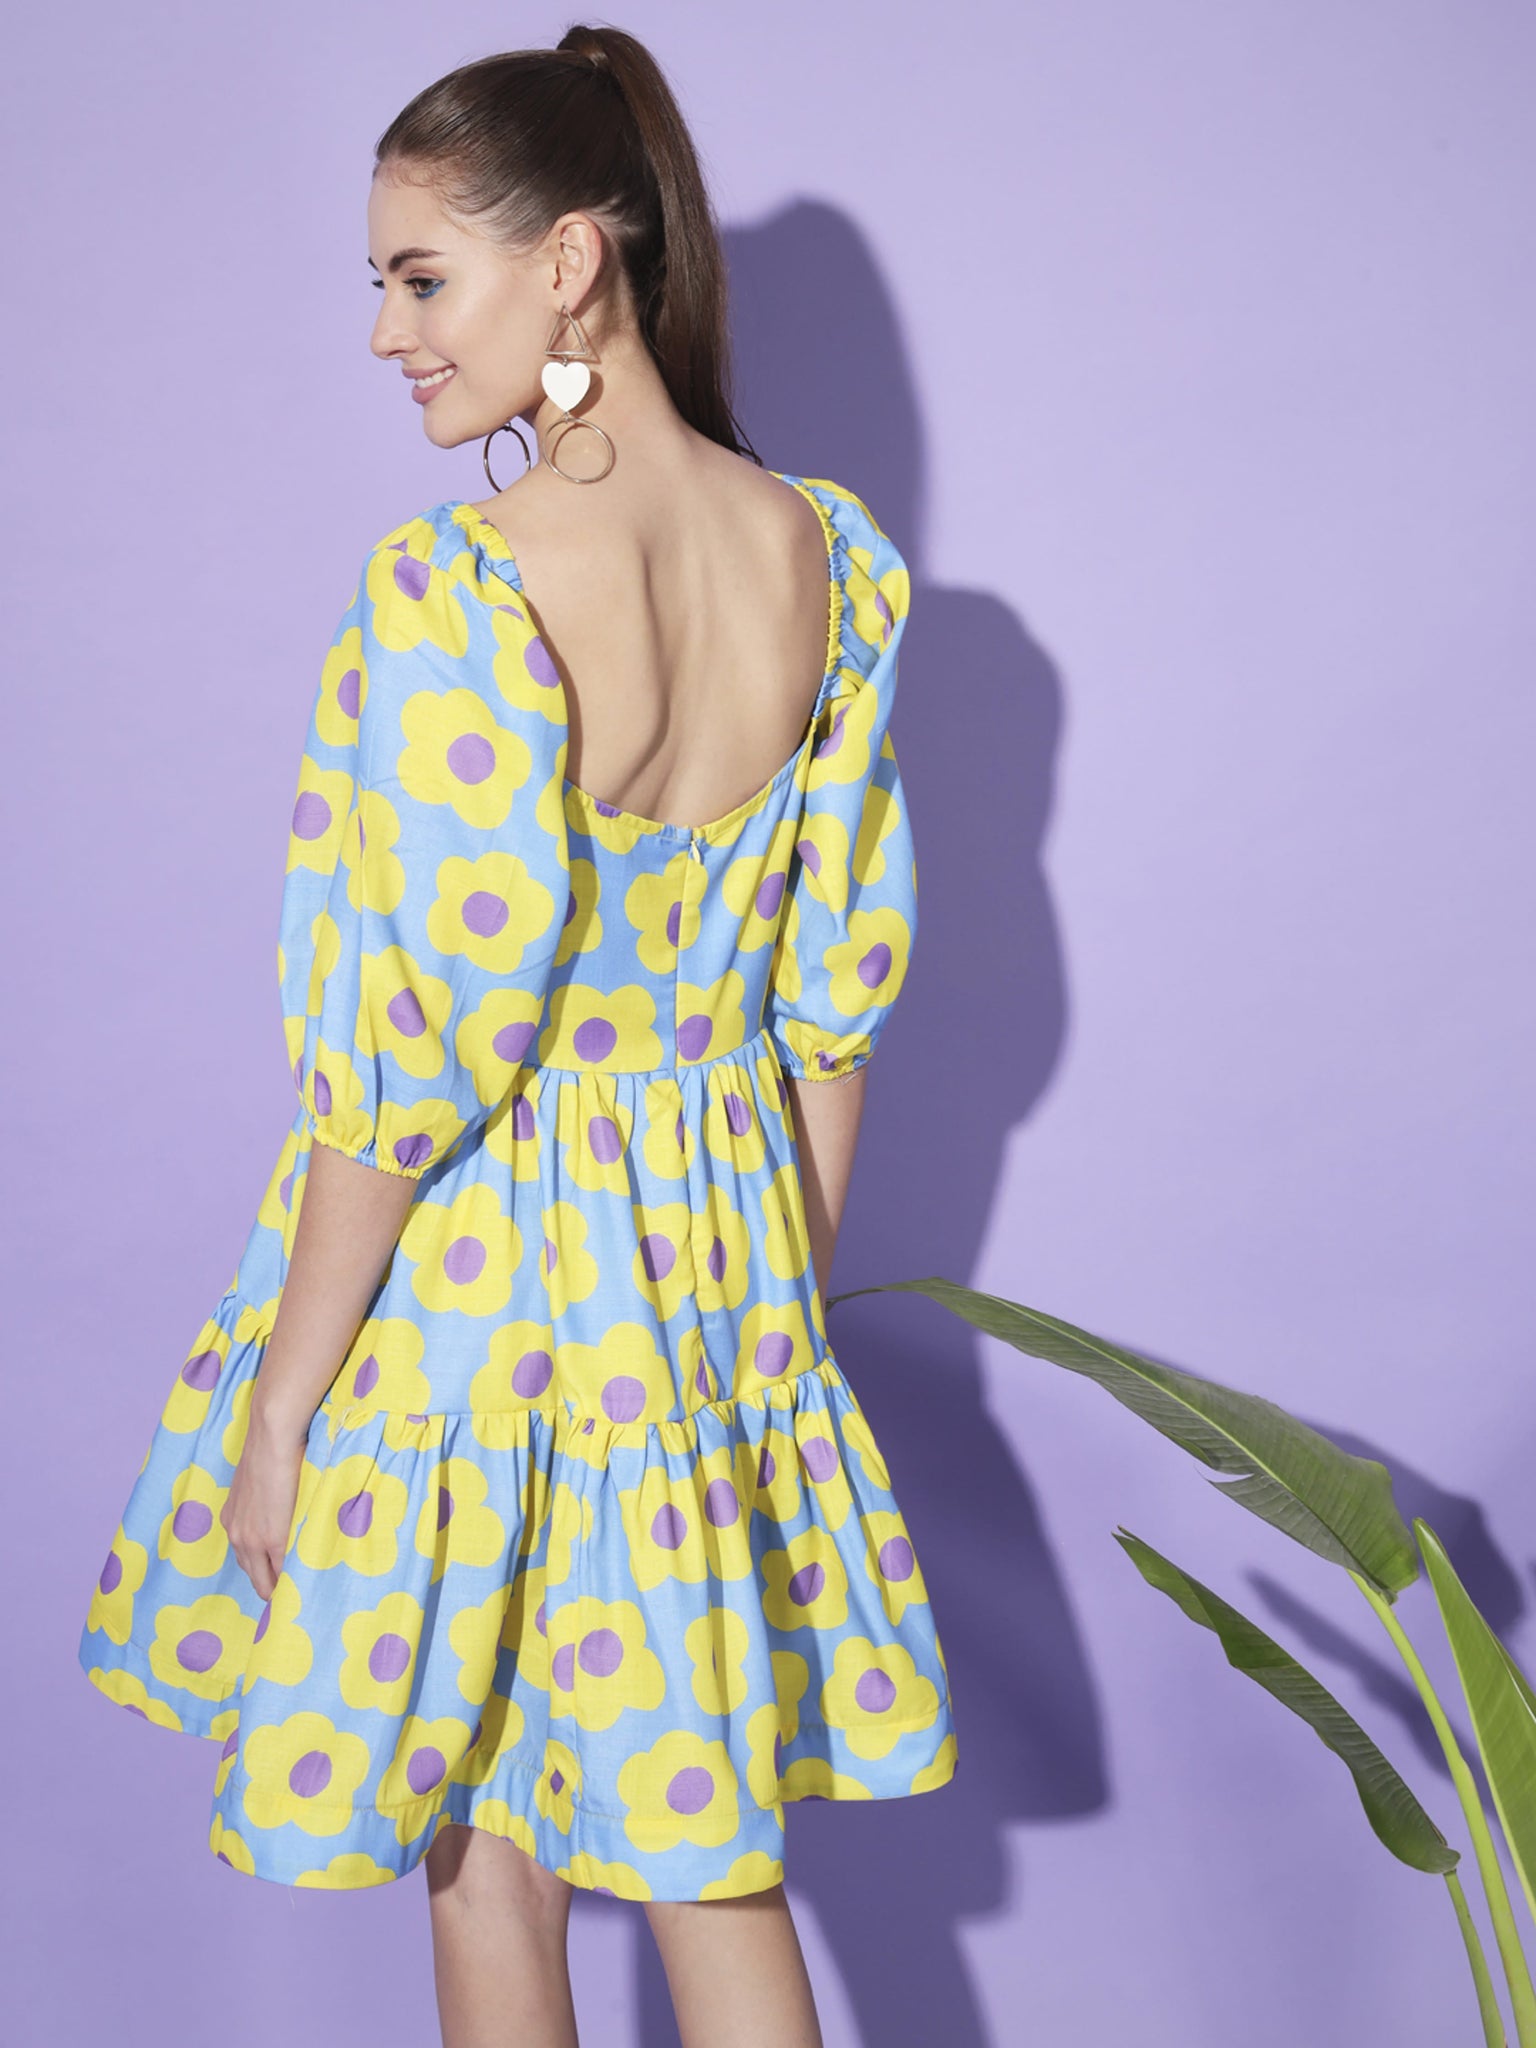 Harmony in Blue and Yellow Floral Dress